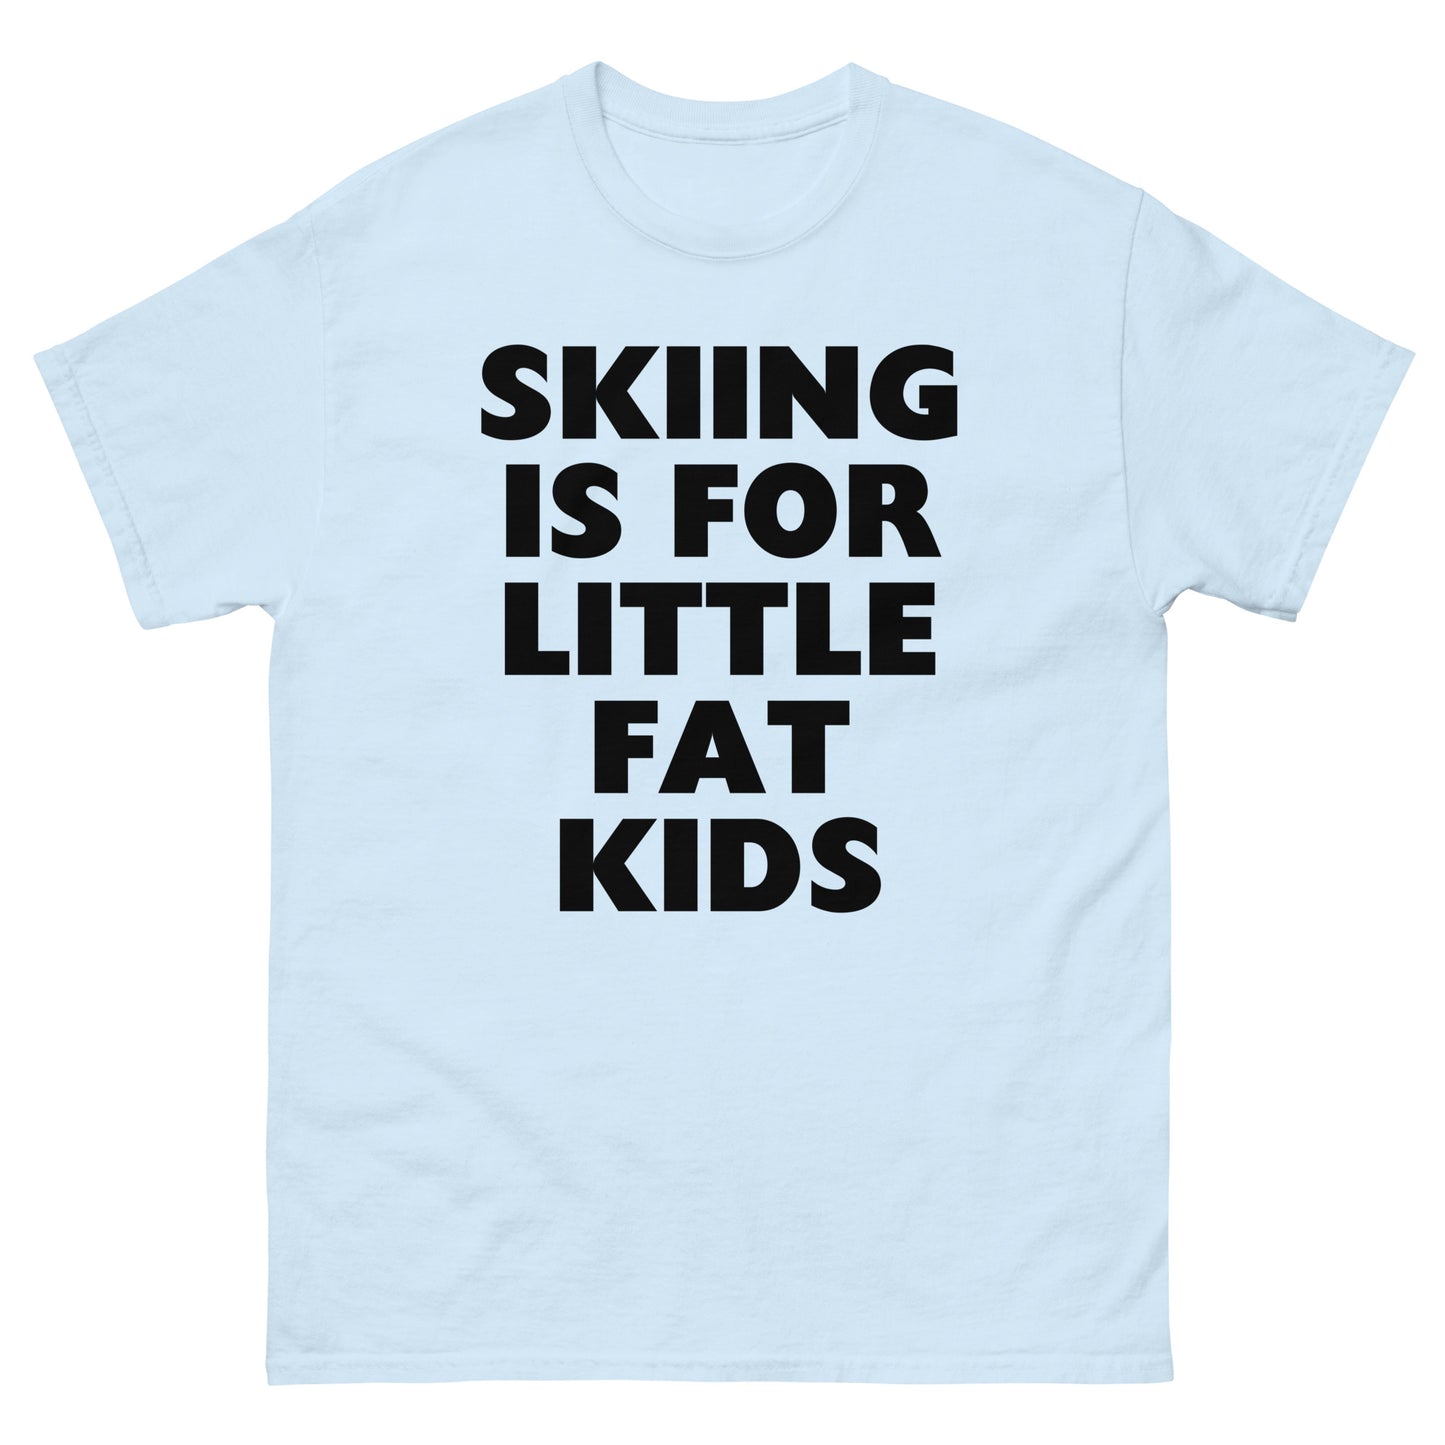 Skiing is for little fat kids printed on t-shirt by Whistler shirts